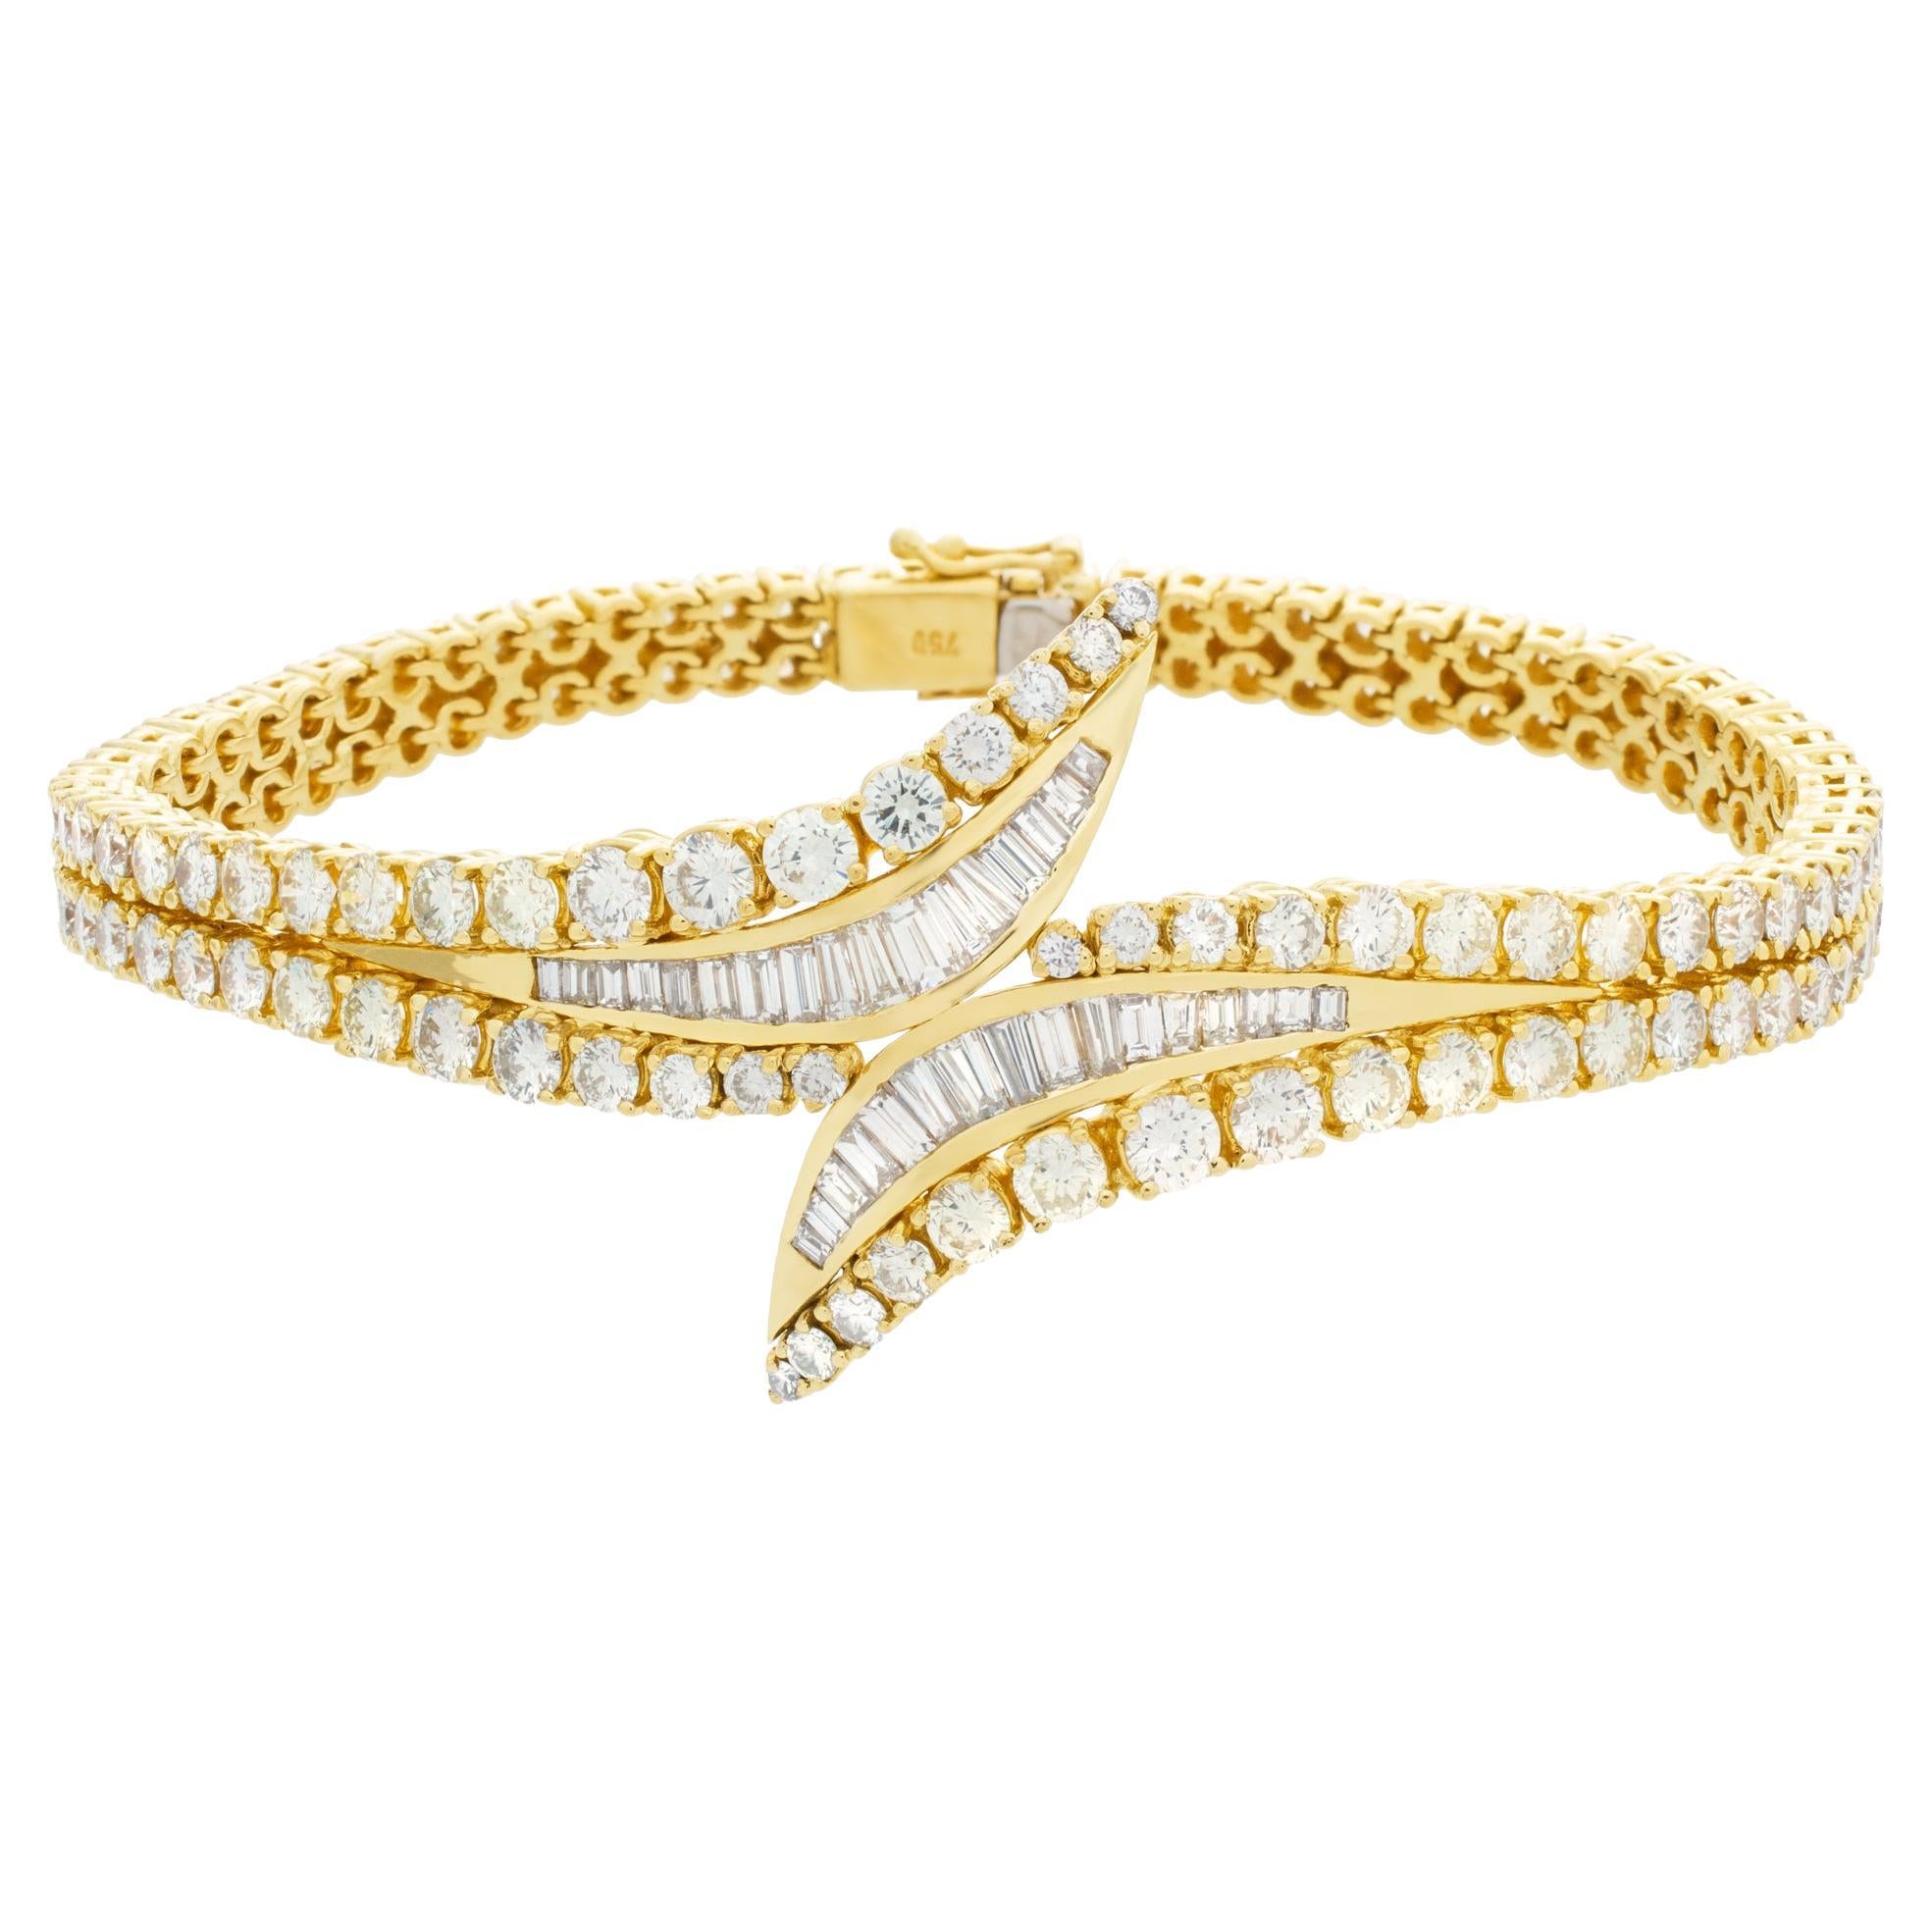 Bracelet in 18k Yellow Gold with over 9 Carats in Round Brilliant Cut Diamonds For Sale